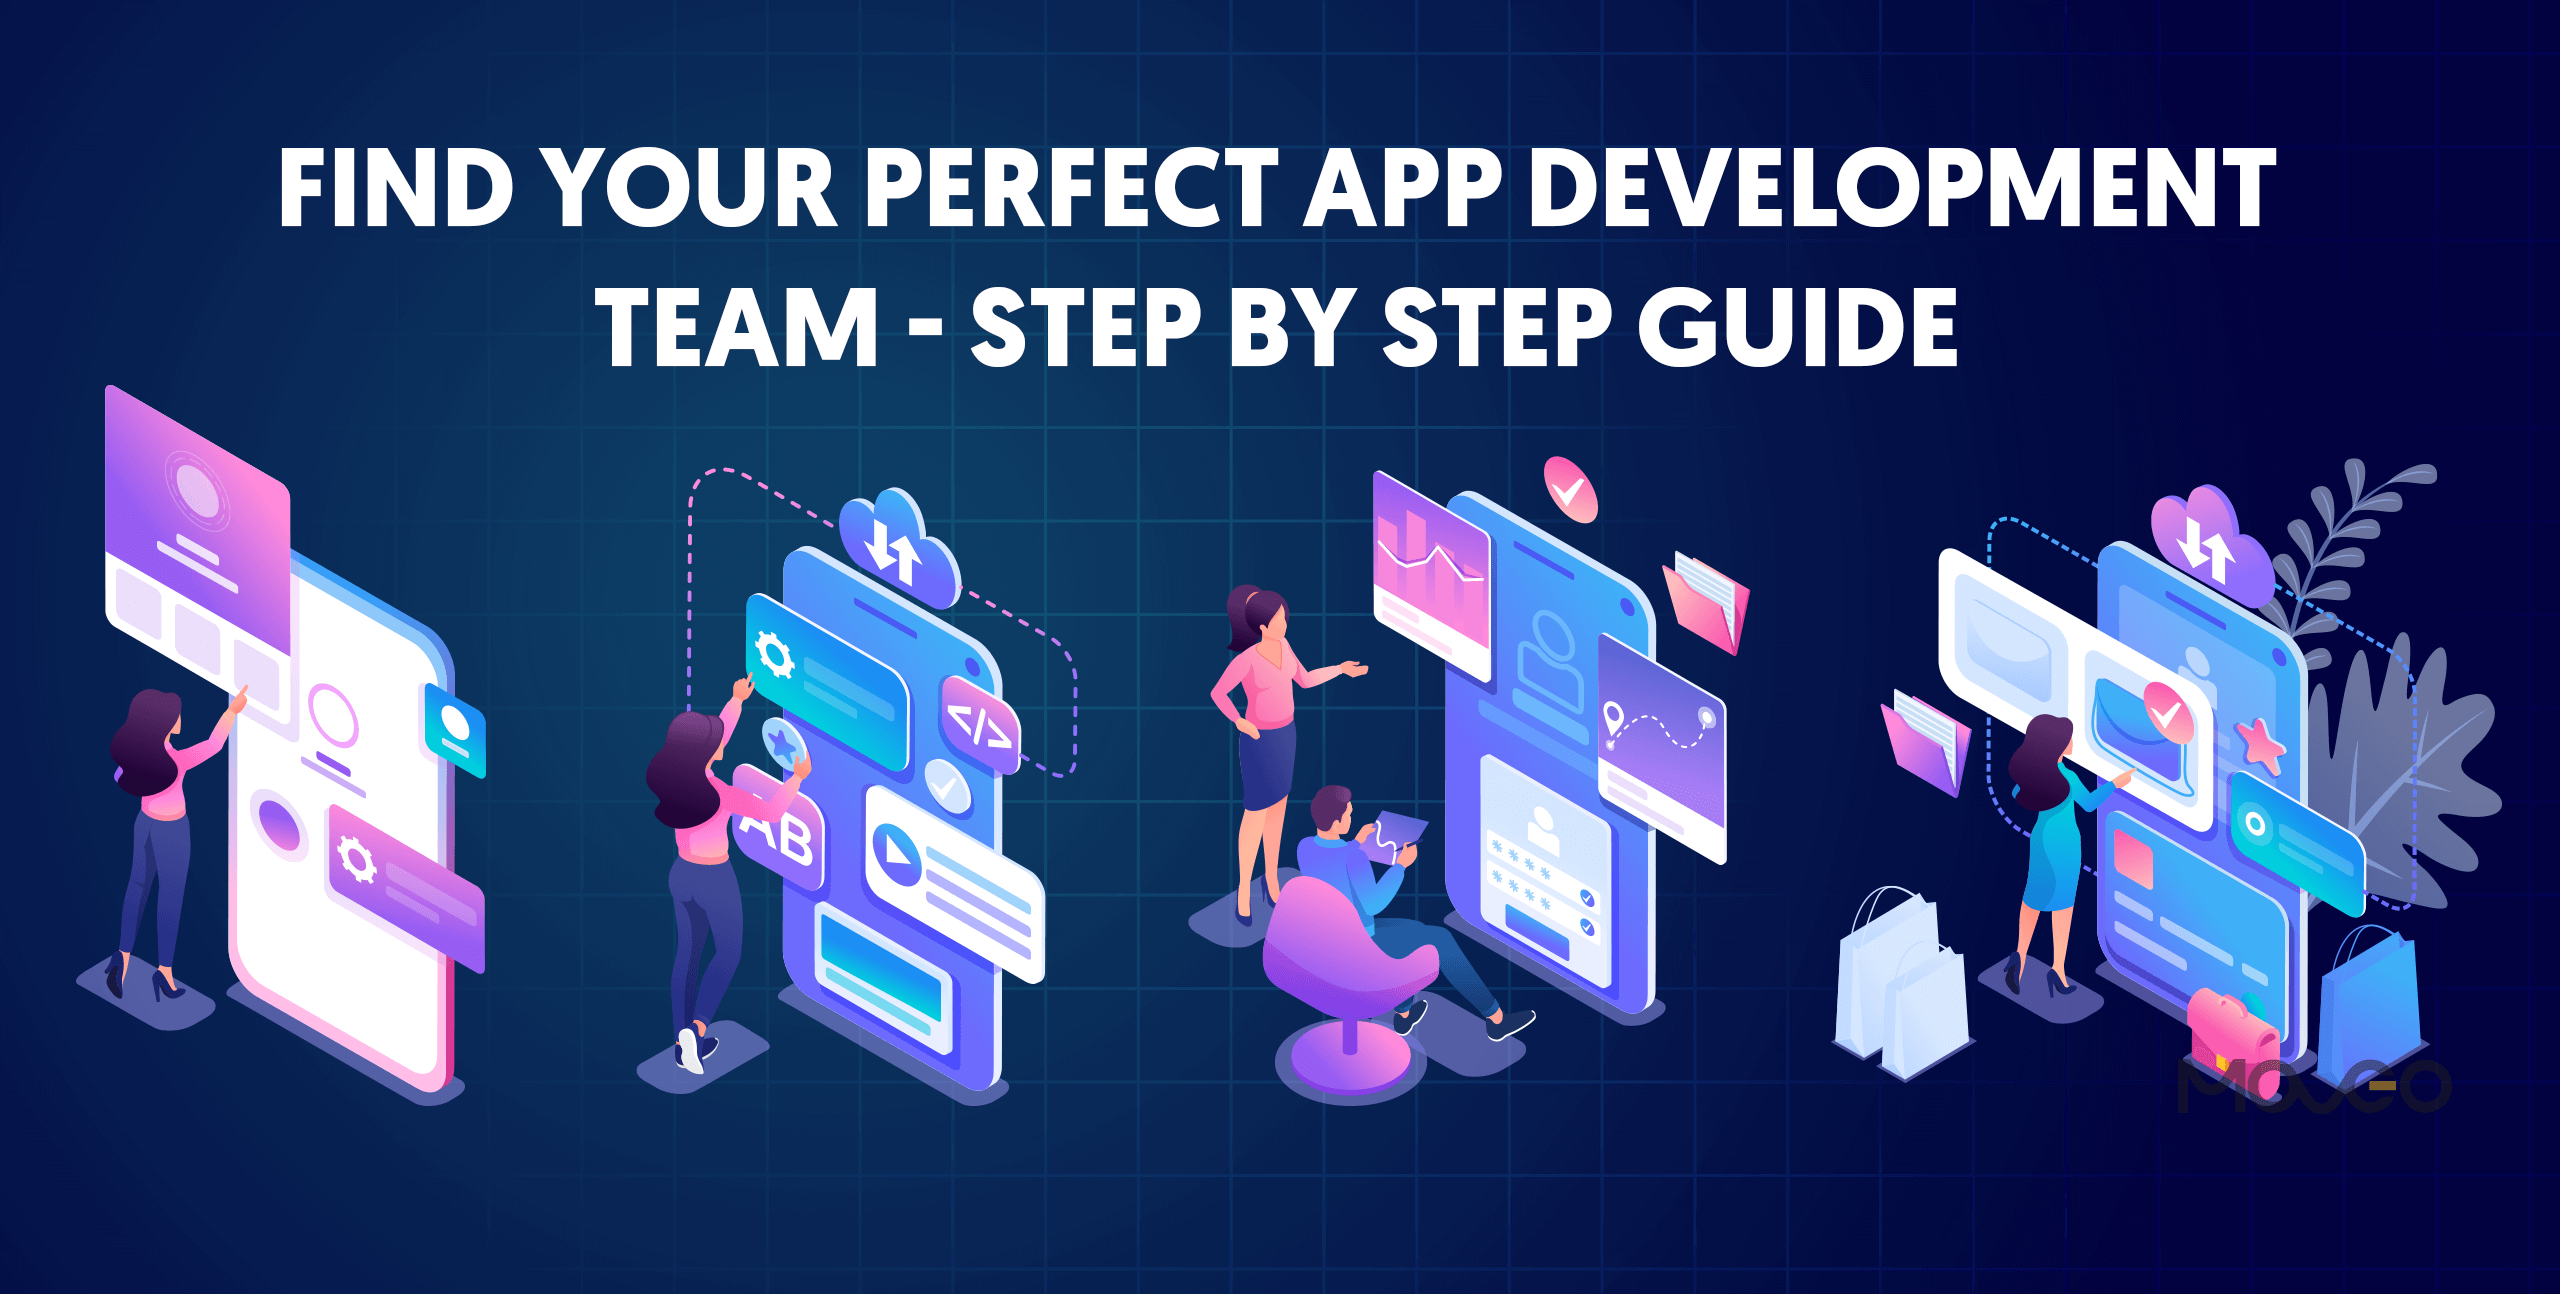 Find your perfect app development team – Step by step guide